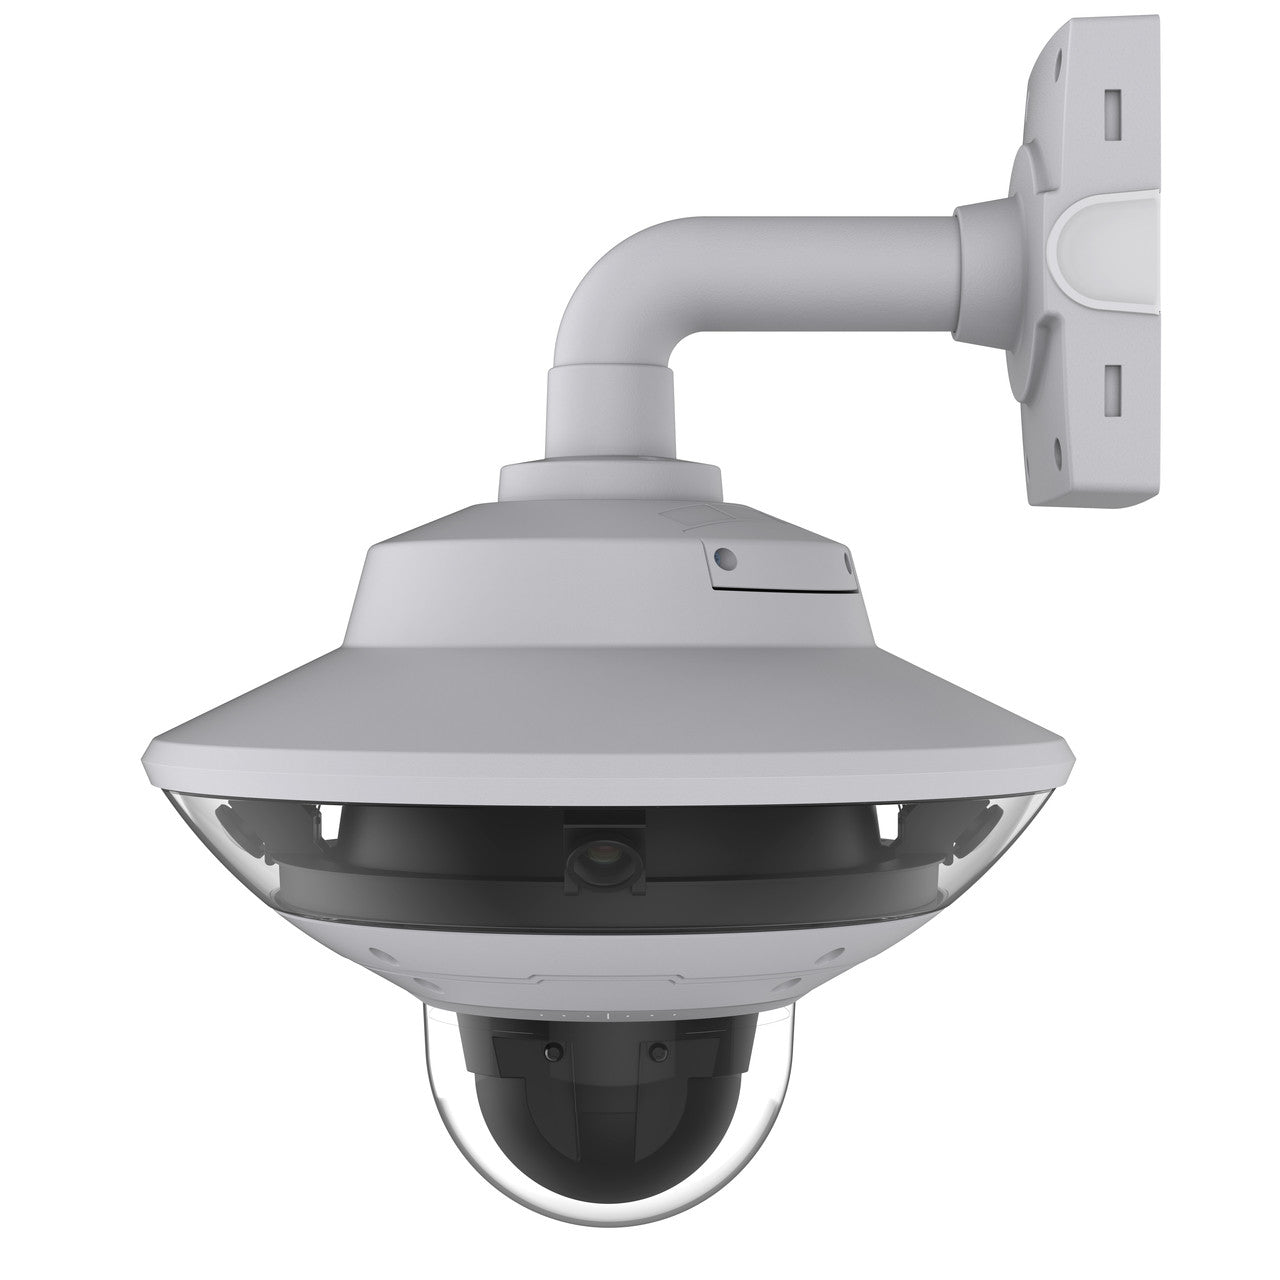 AXIS Q6000-E with embedded Q60-E series PTZ camera (must be purchased seperately)